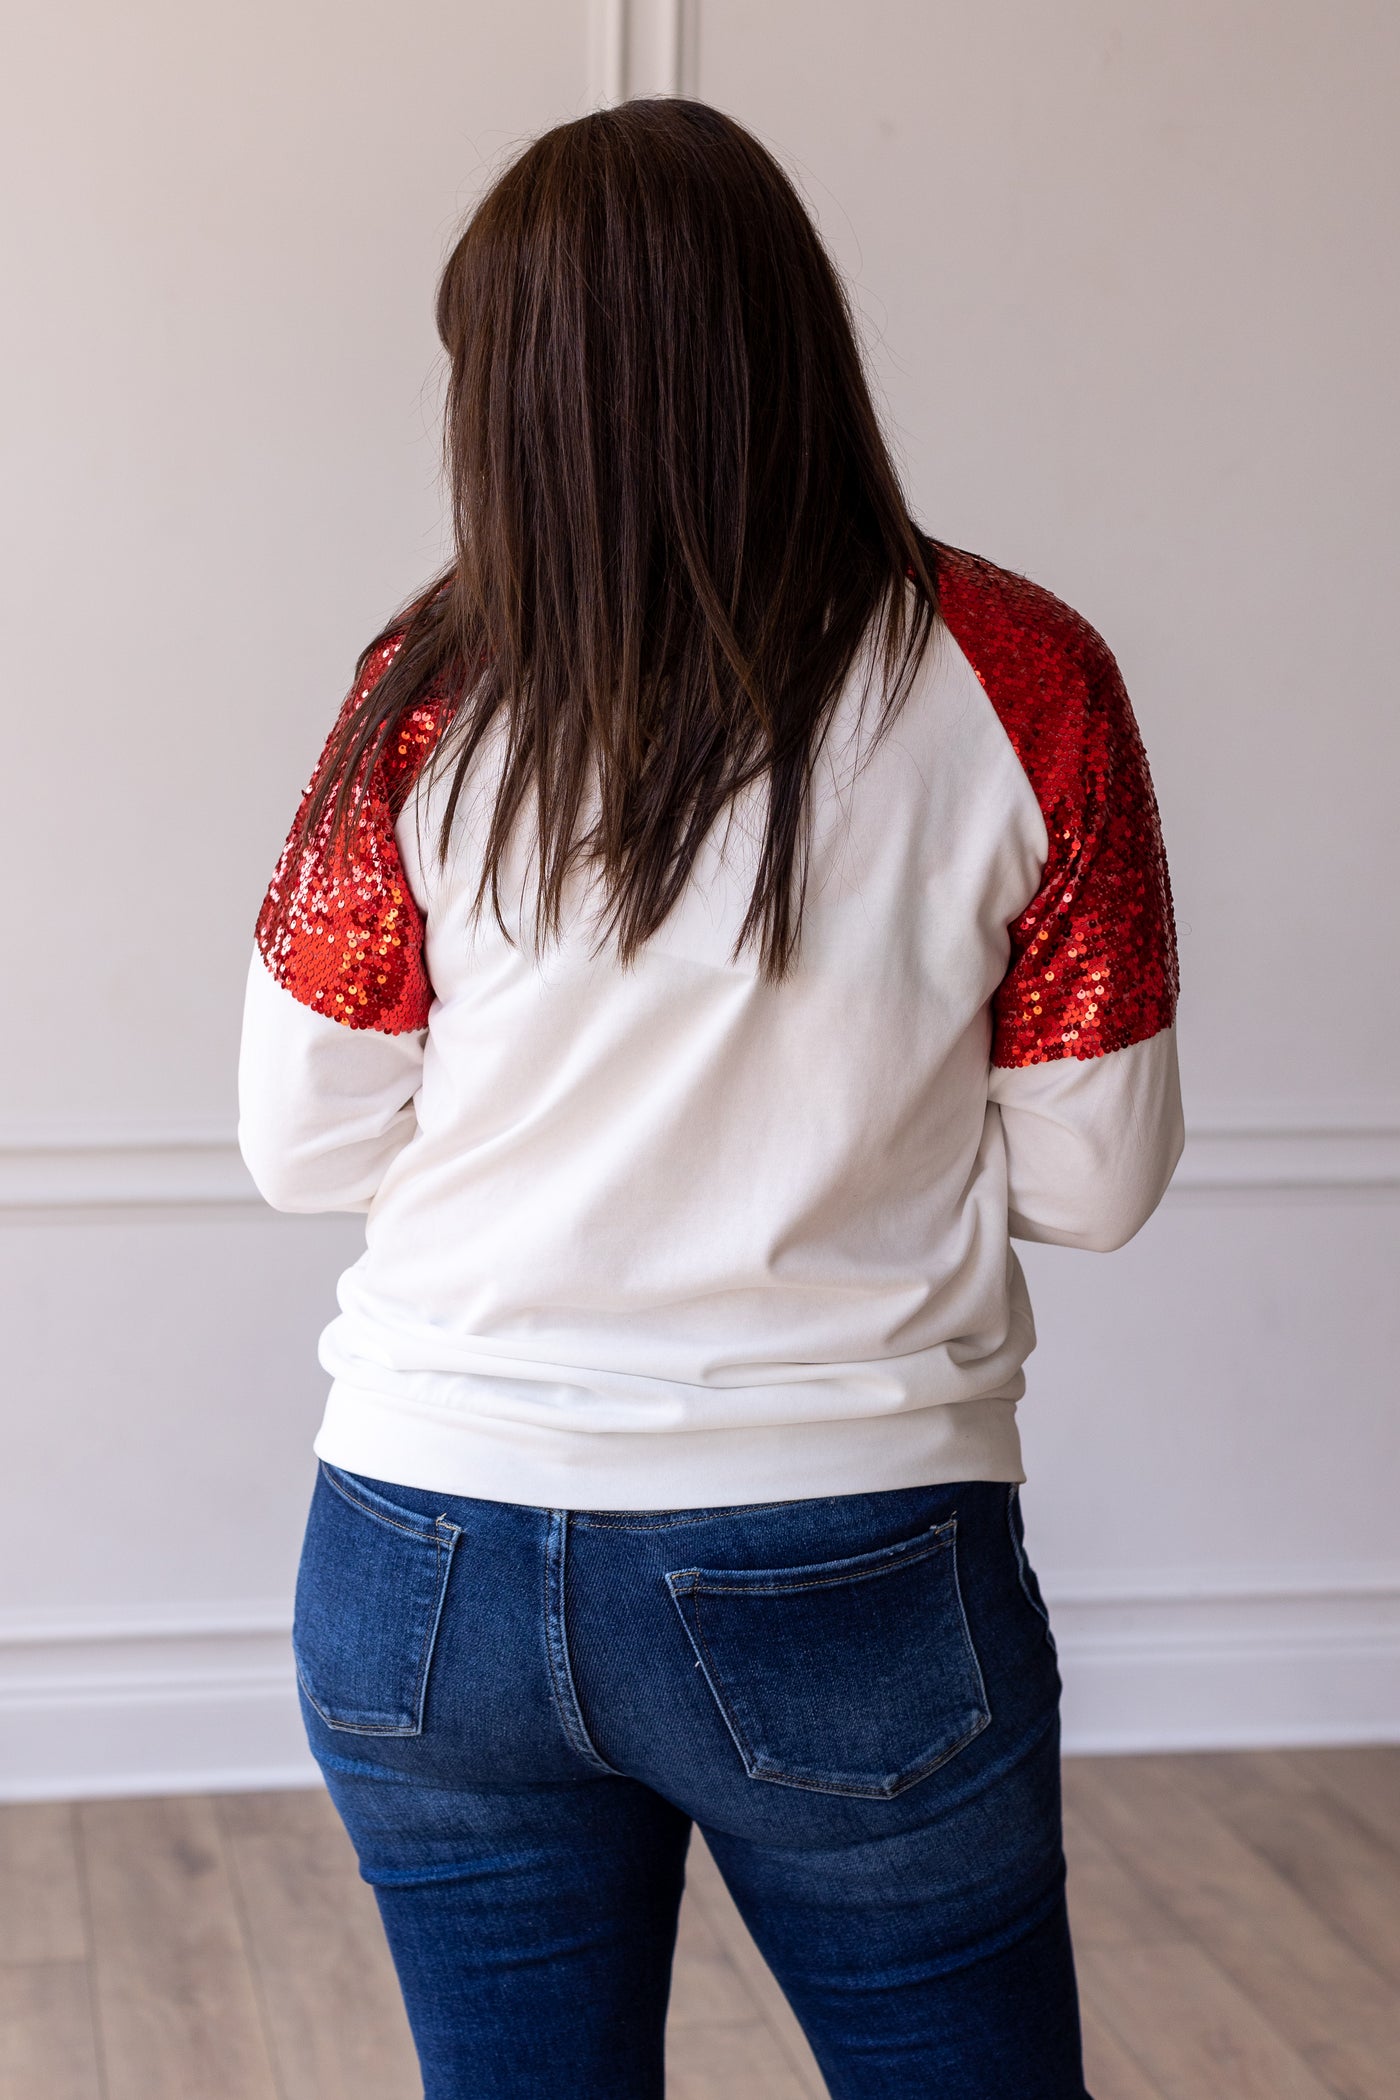 Santa on White Sweatshirt with Red Sequin Details